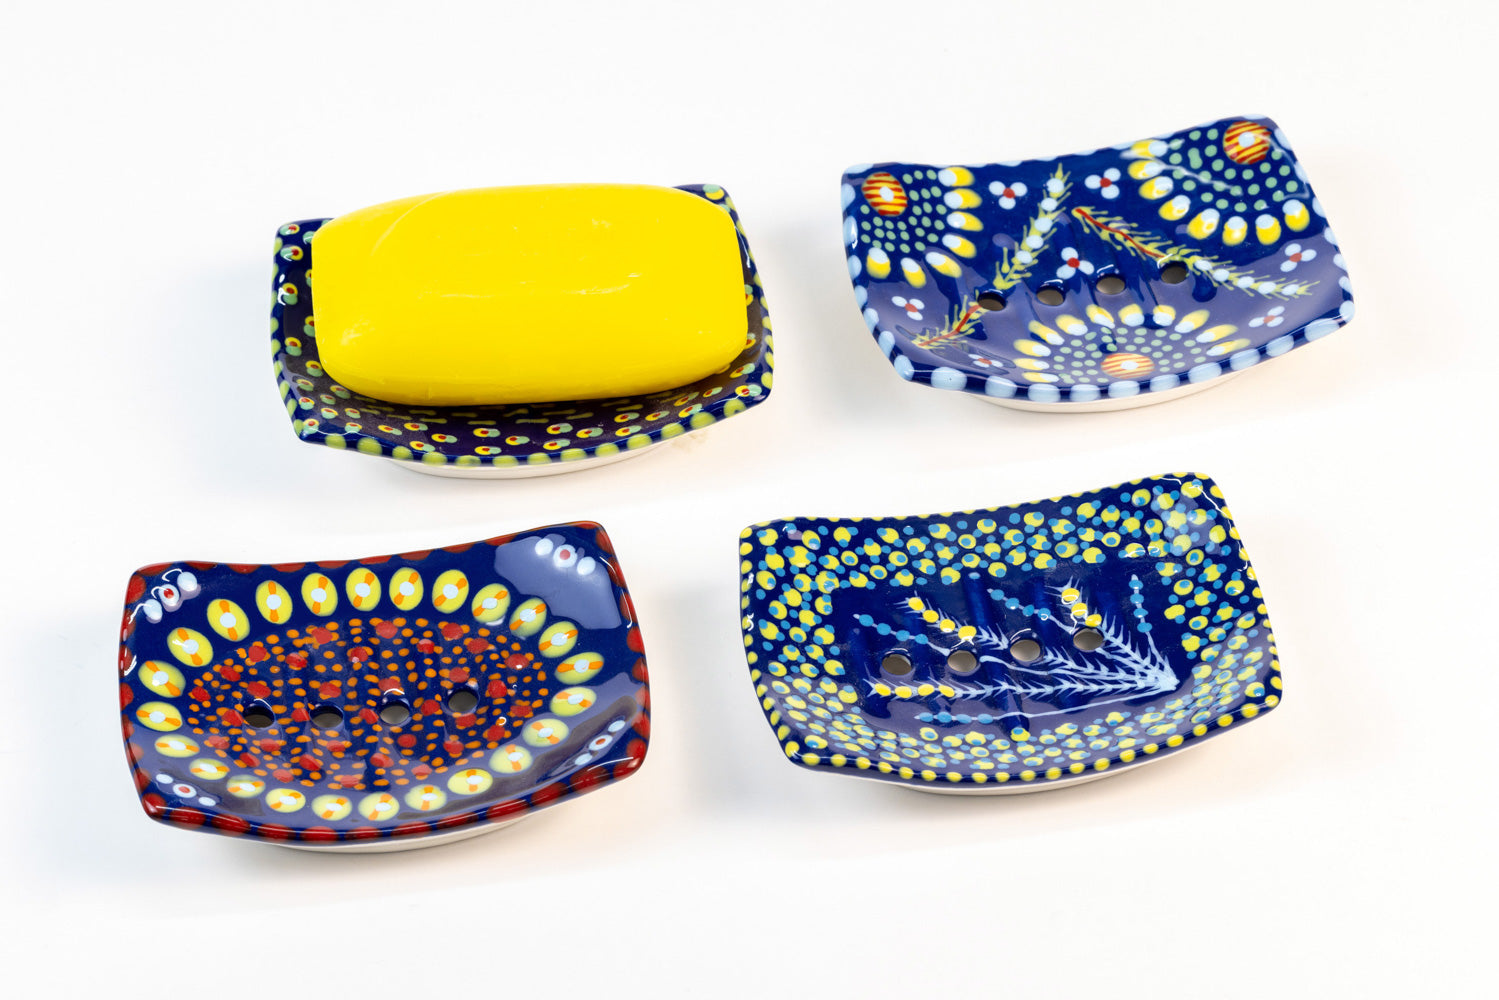 Ceramic square soap dish with base color of Indigo Blue. Flowery design with dots painted on top in yellow, turquoise, red and touches of orange. Drain holes in dish!